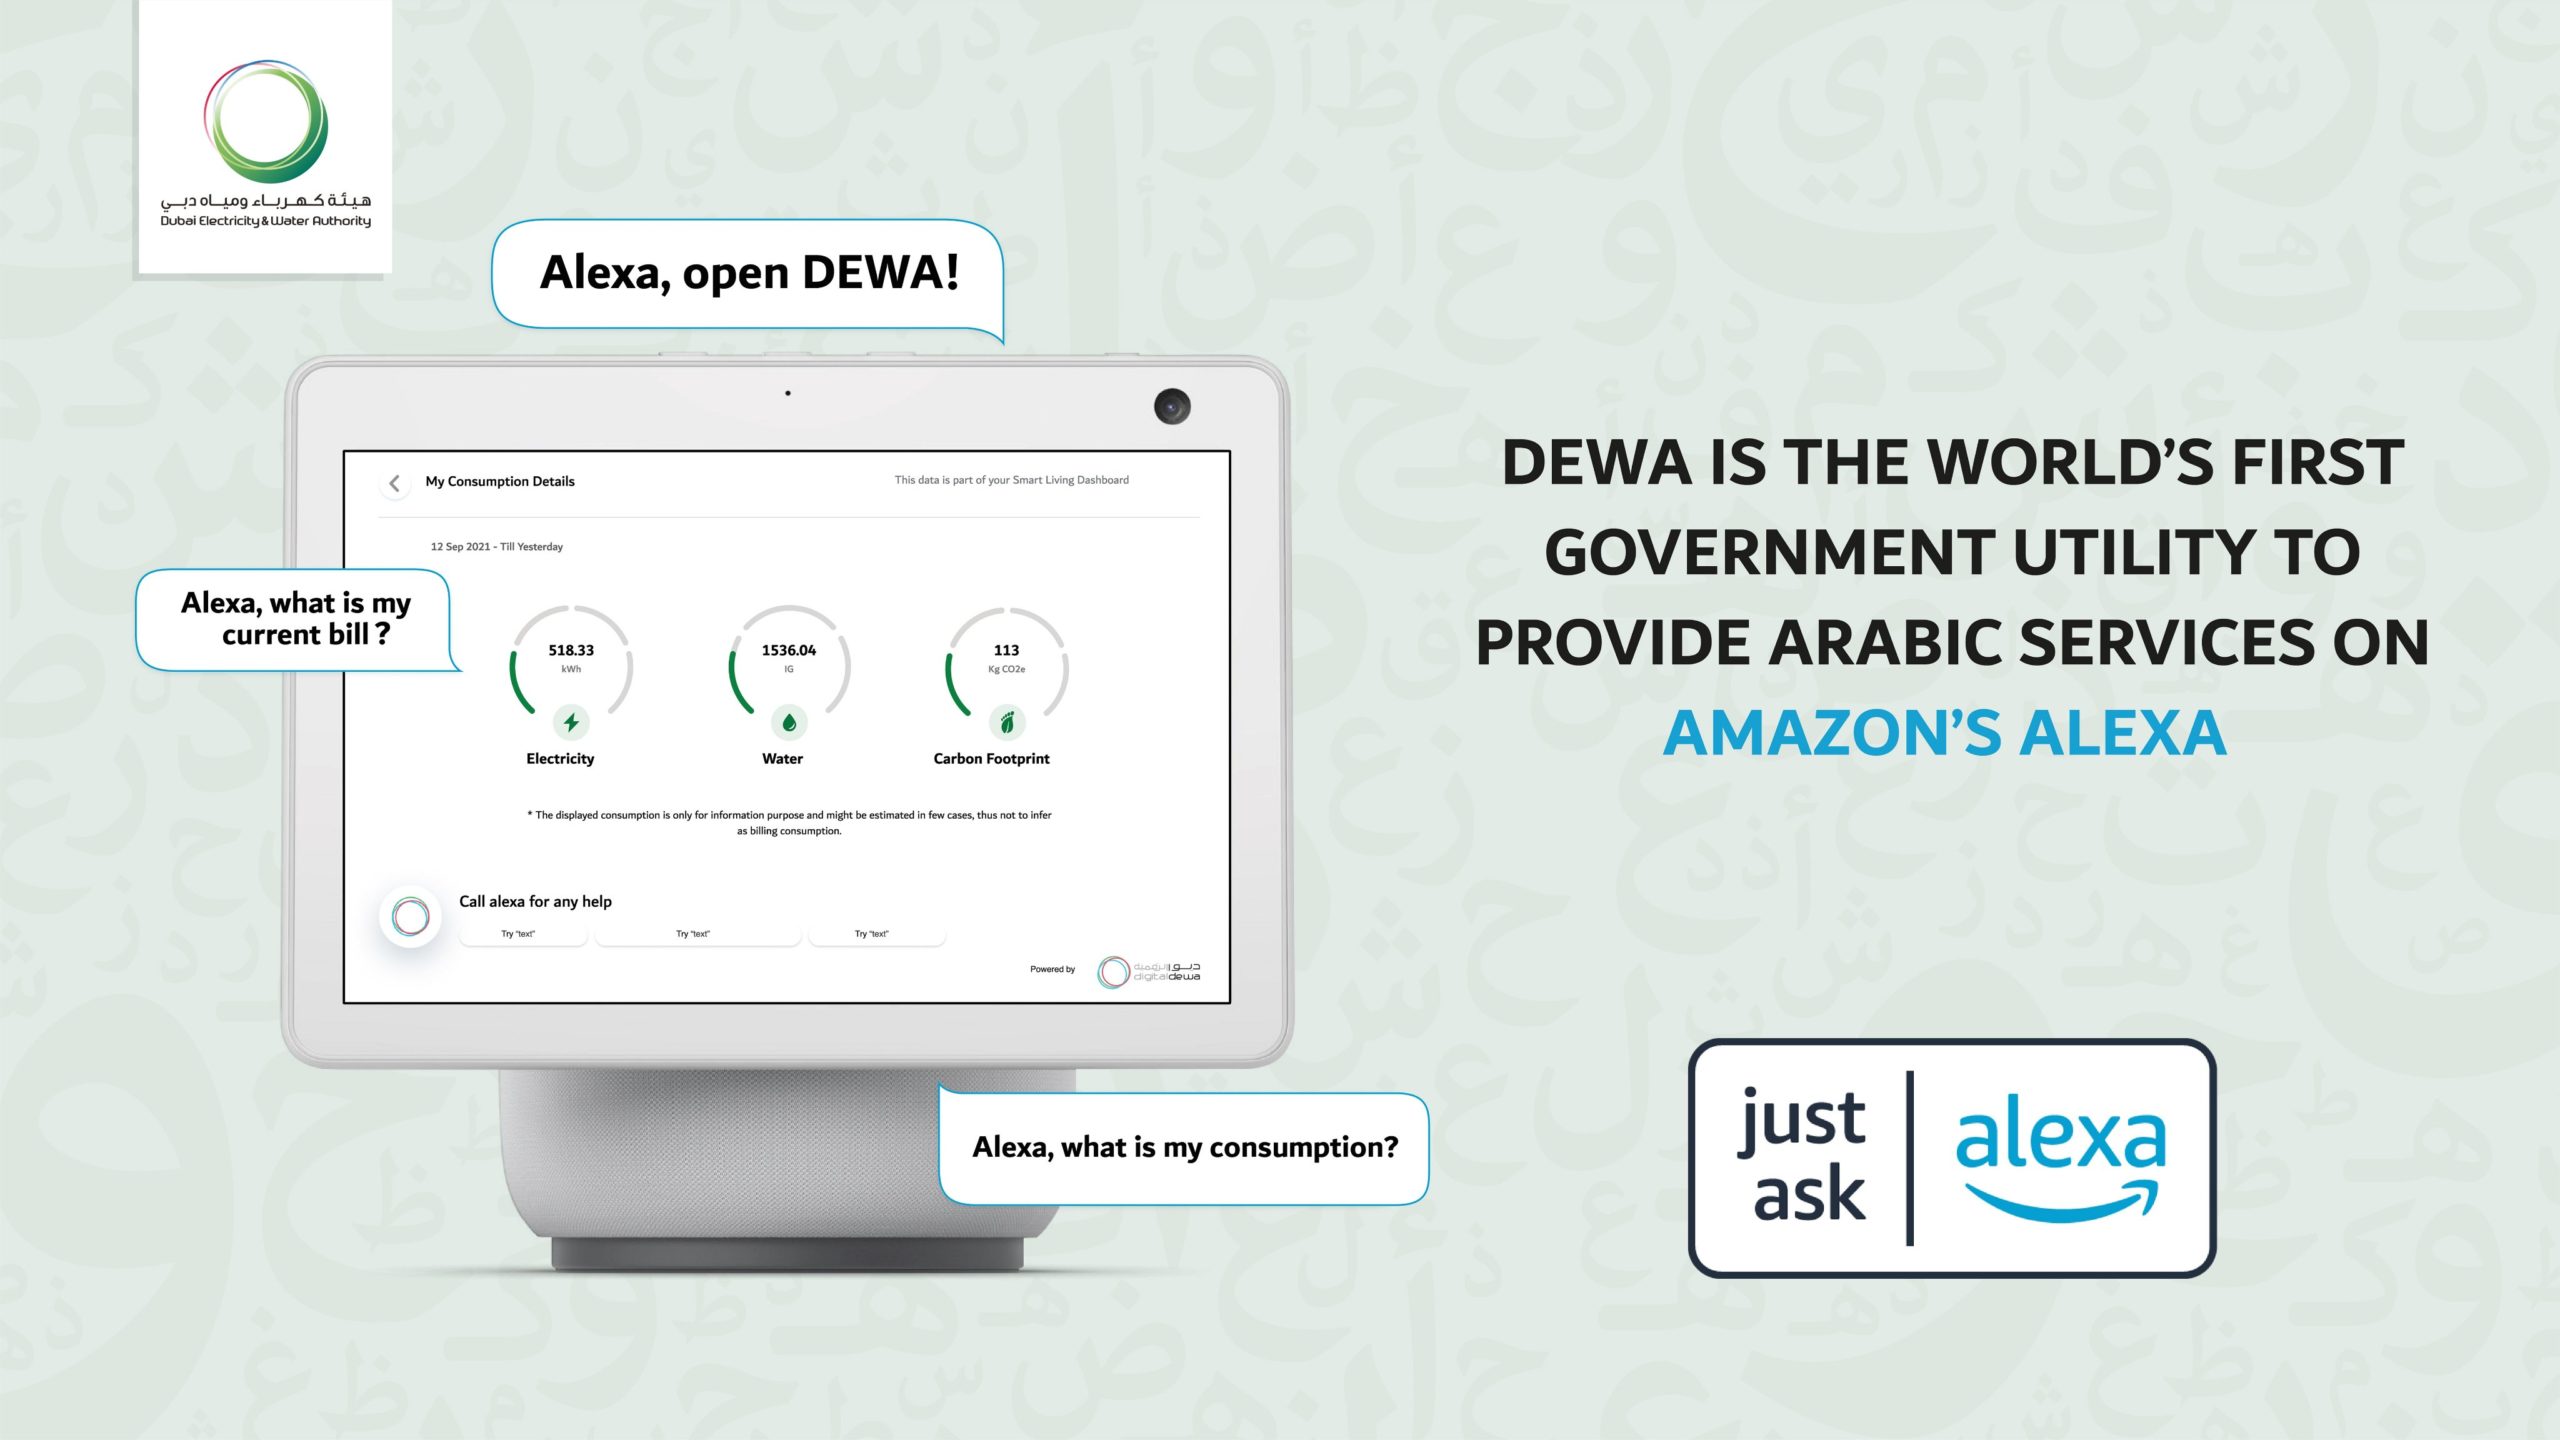 DEWA Is World’s First Government Utility To Provide Arabic Services On Amazon’s Alexa